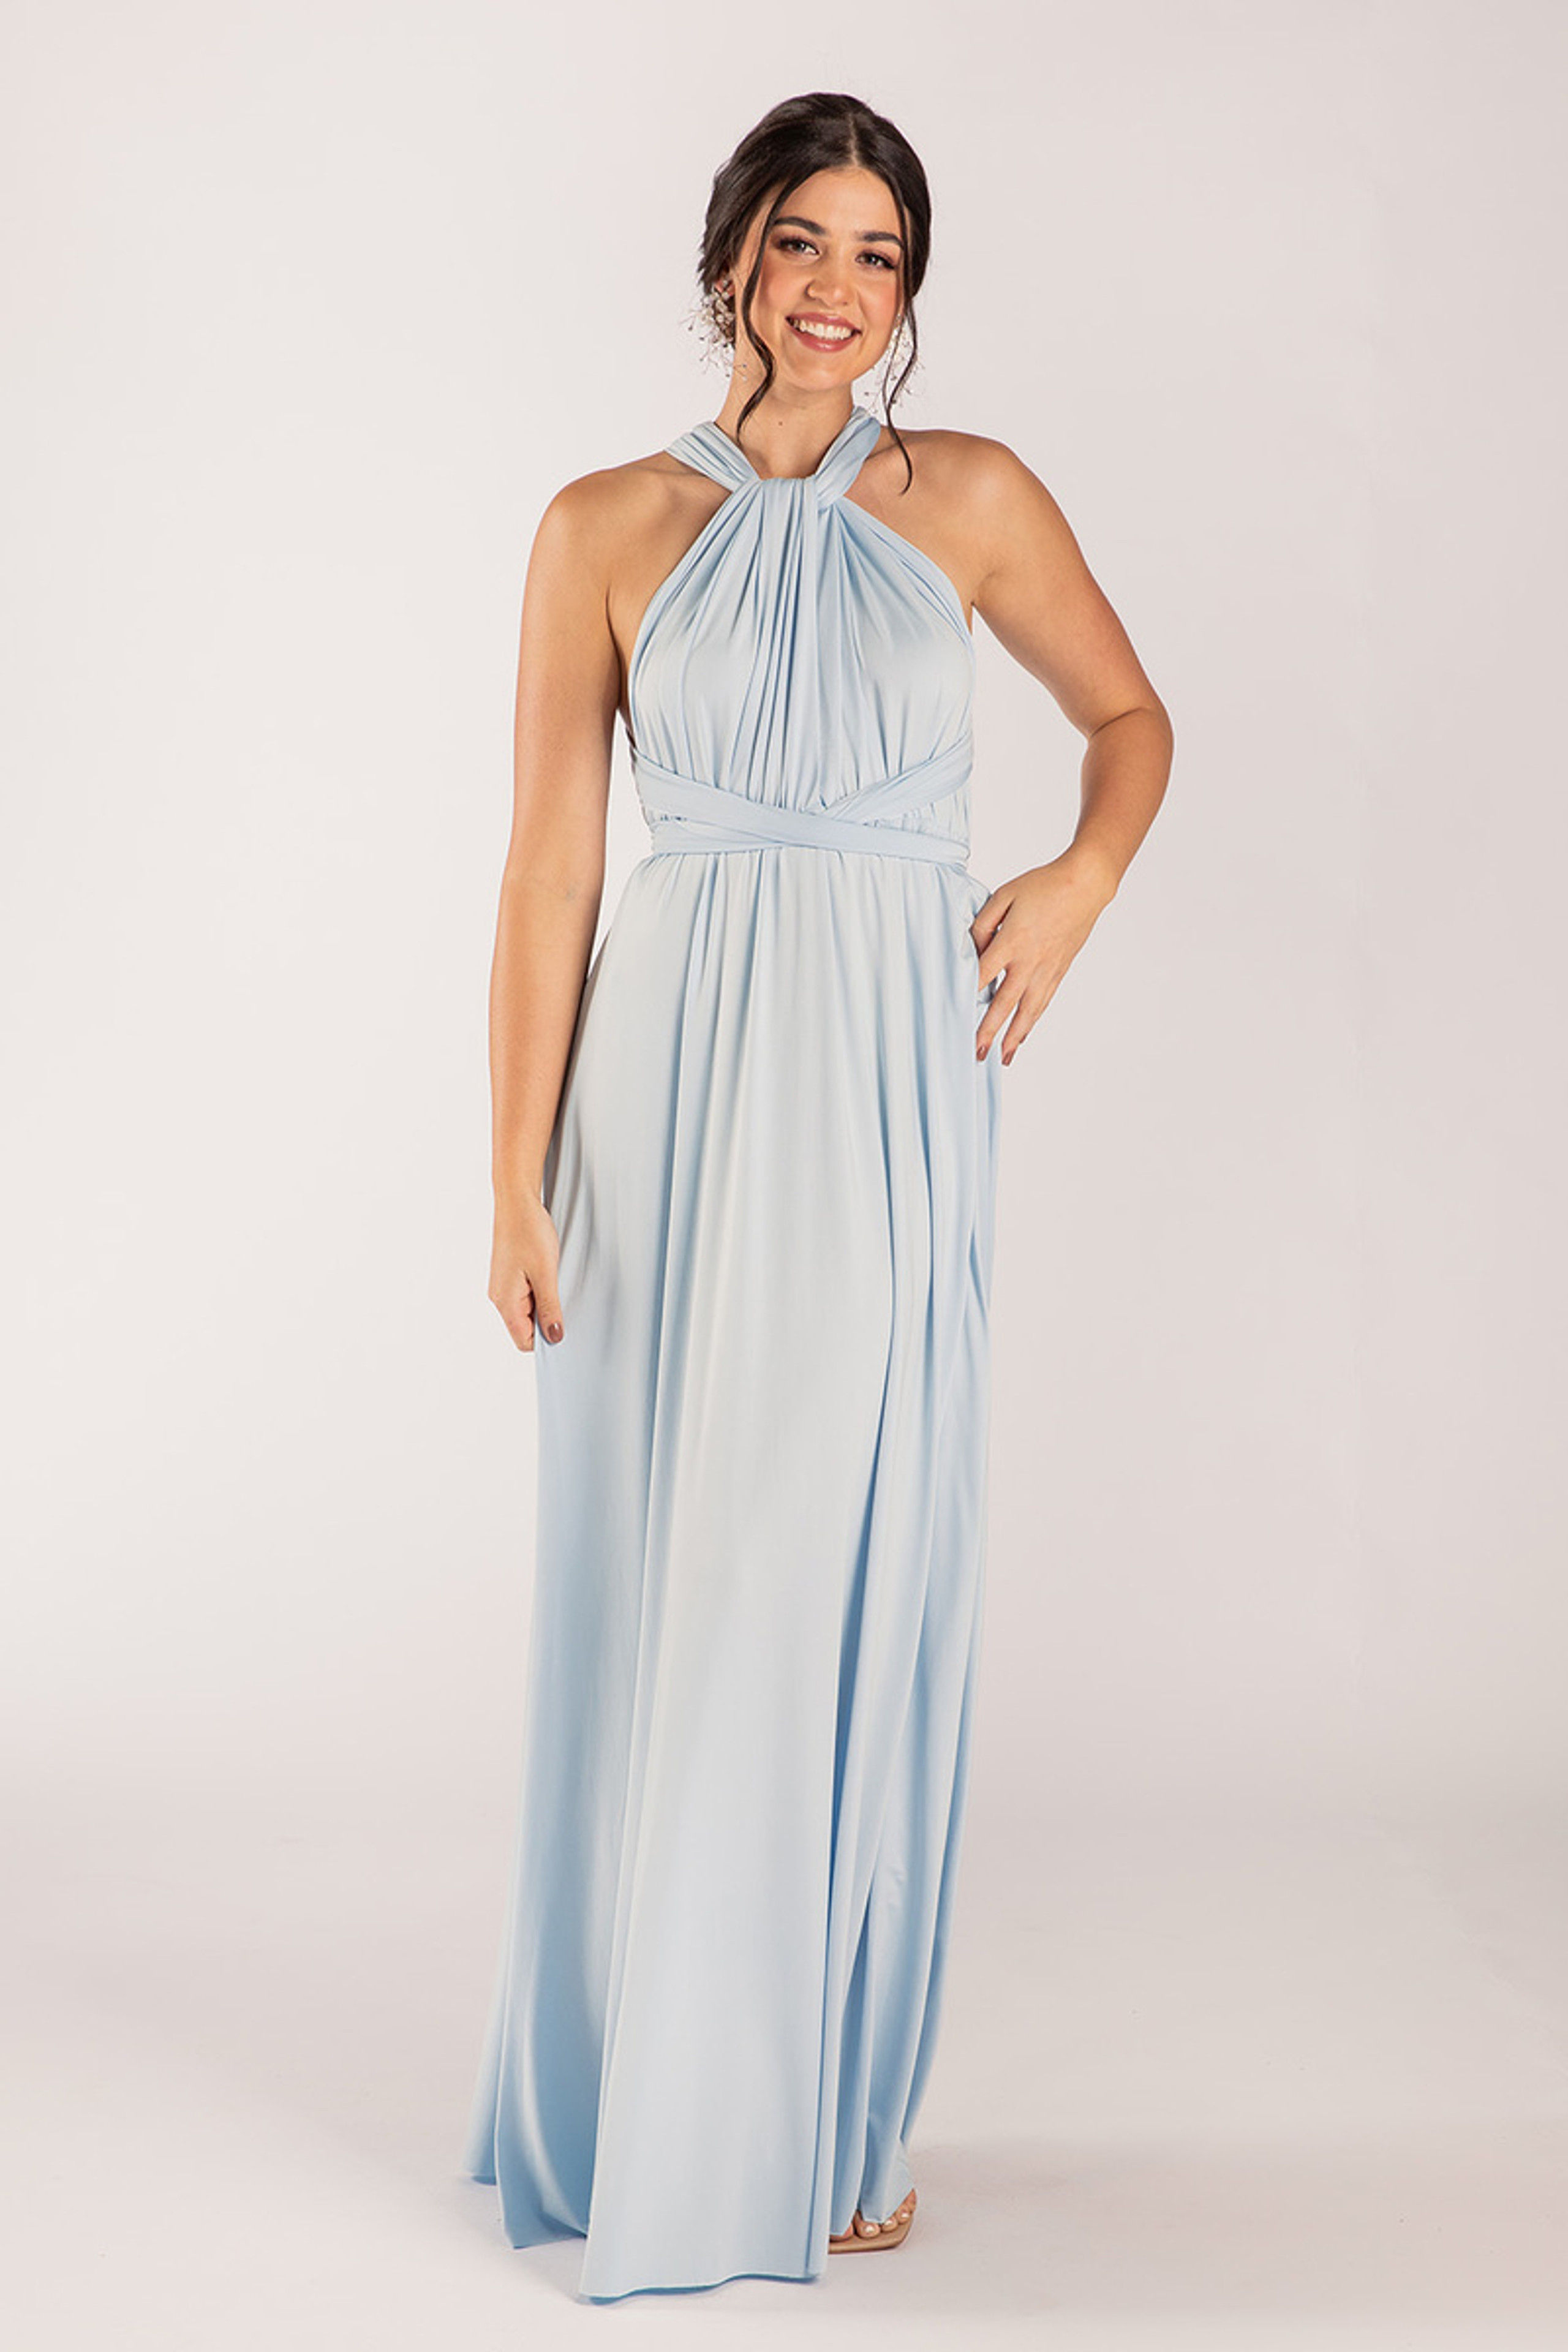 Classic Multiway Infinity Bridesmaid Dress In Powder Blue - Formal ...